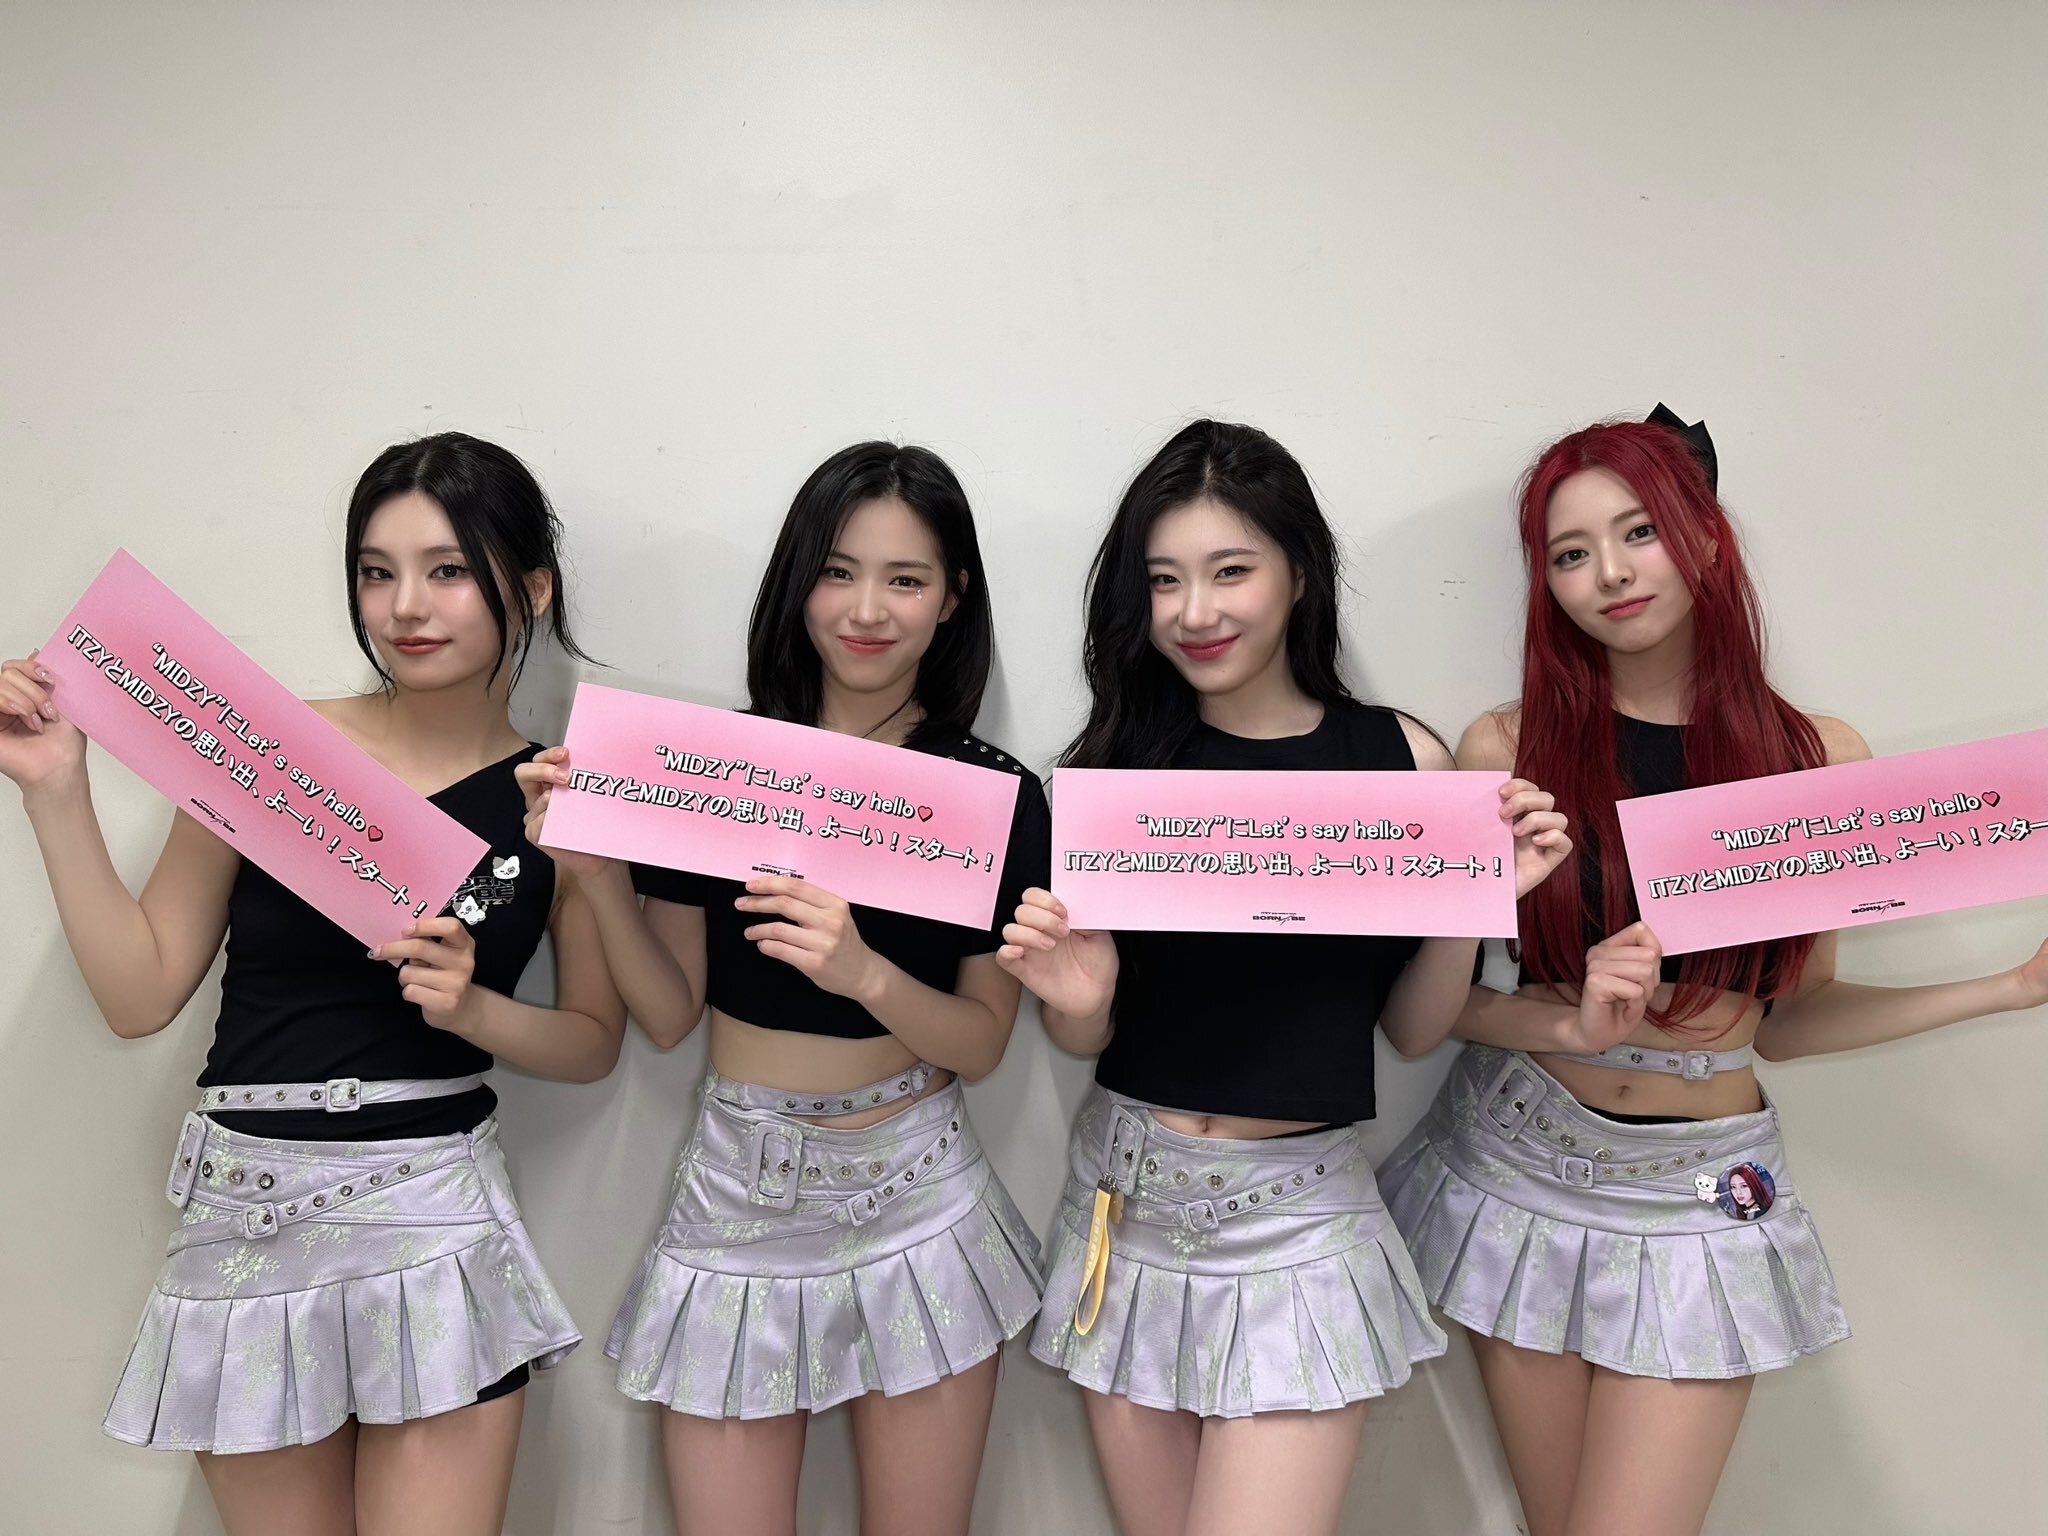 240518 - ITZY JAPAN Twitter Update - ITZY 2nd World Tour 'BORN TO 